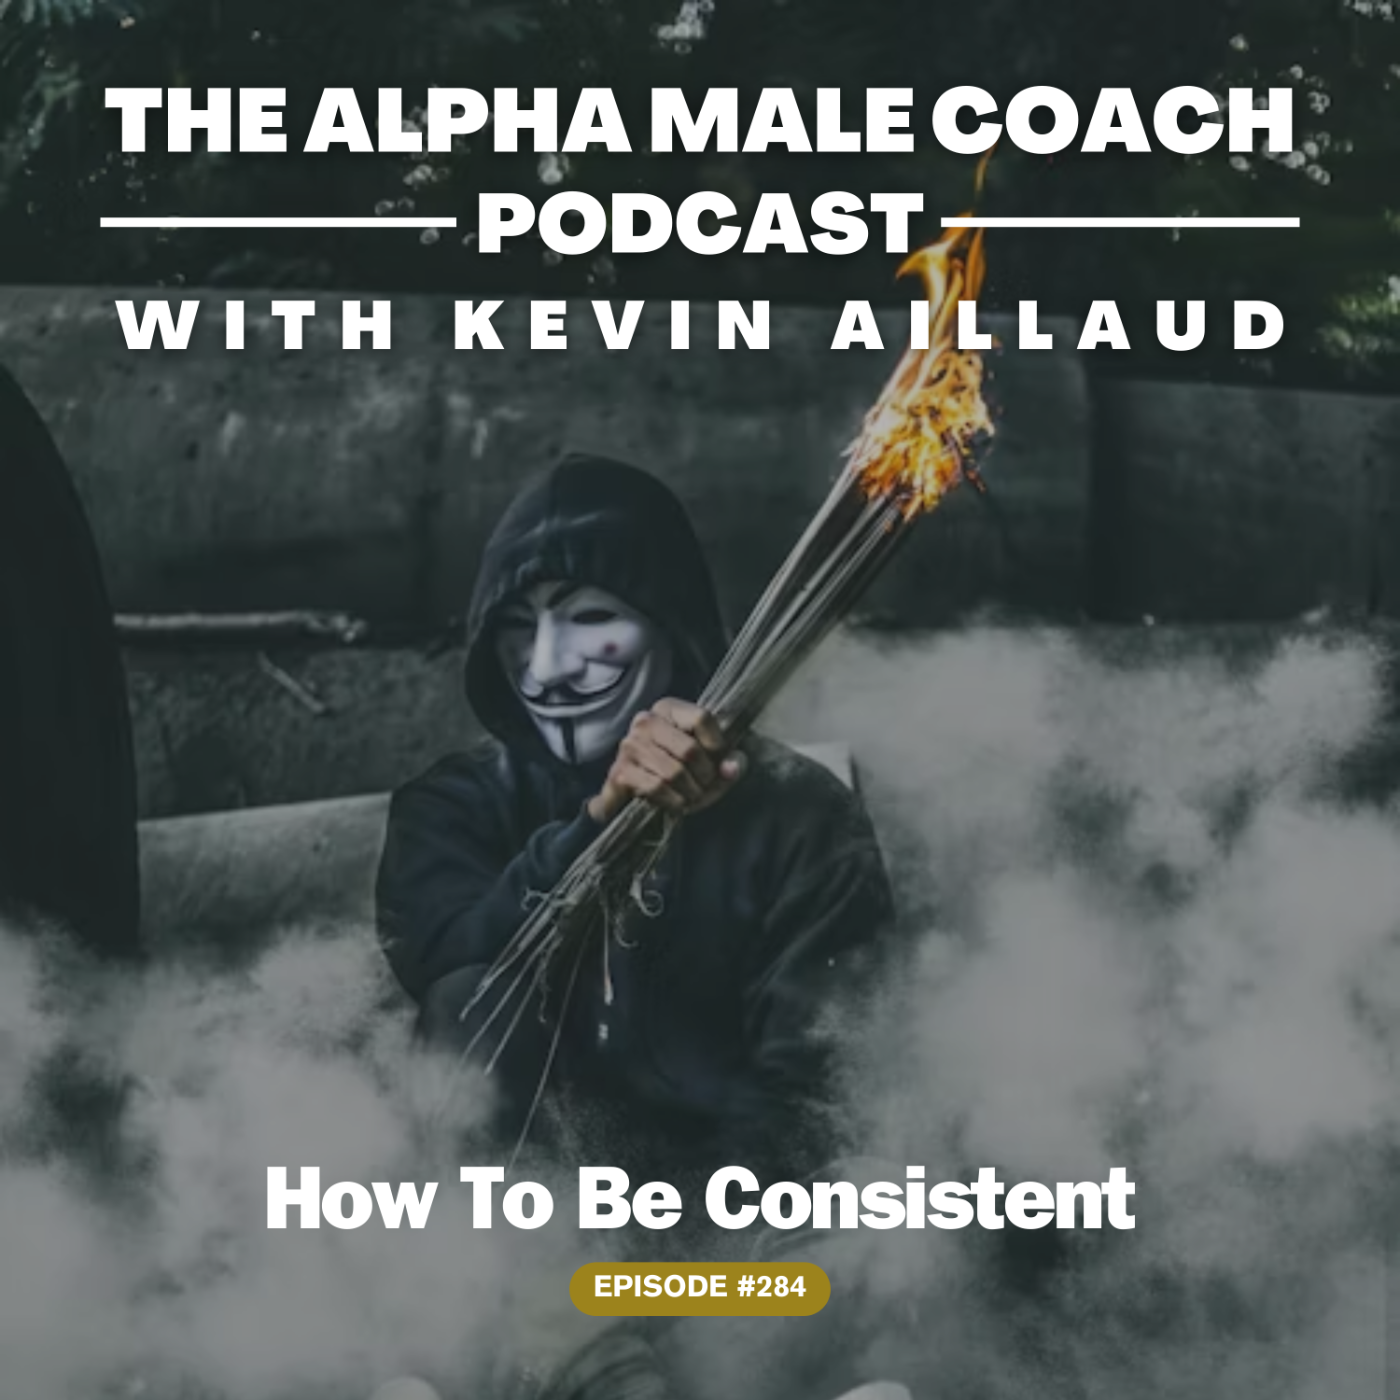 Episode 284: How To Be Consistent